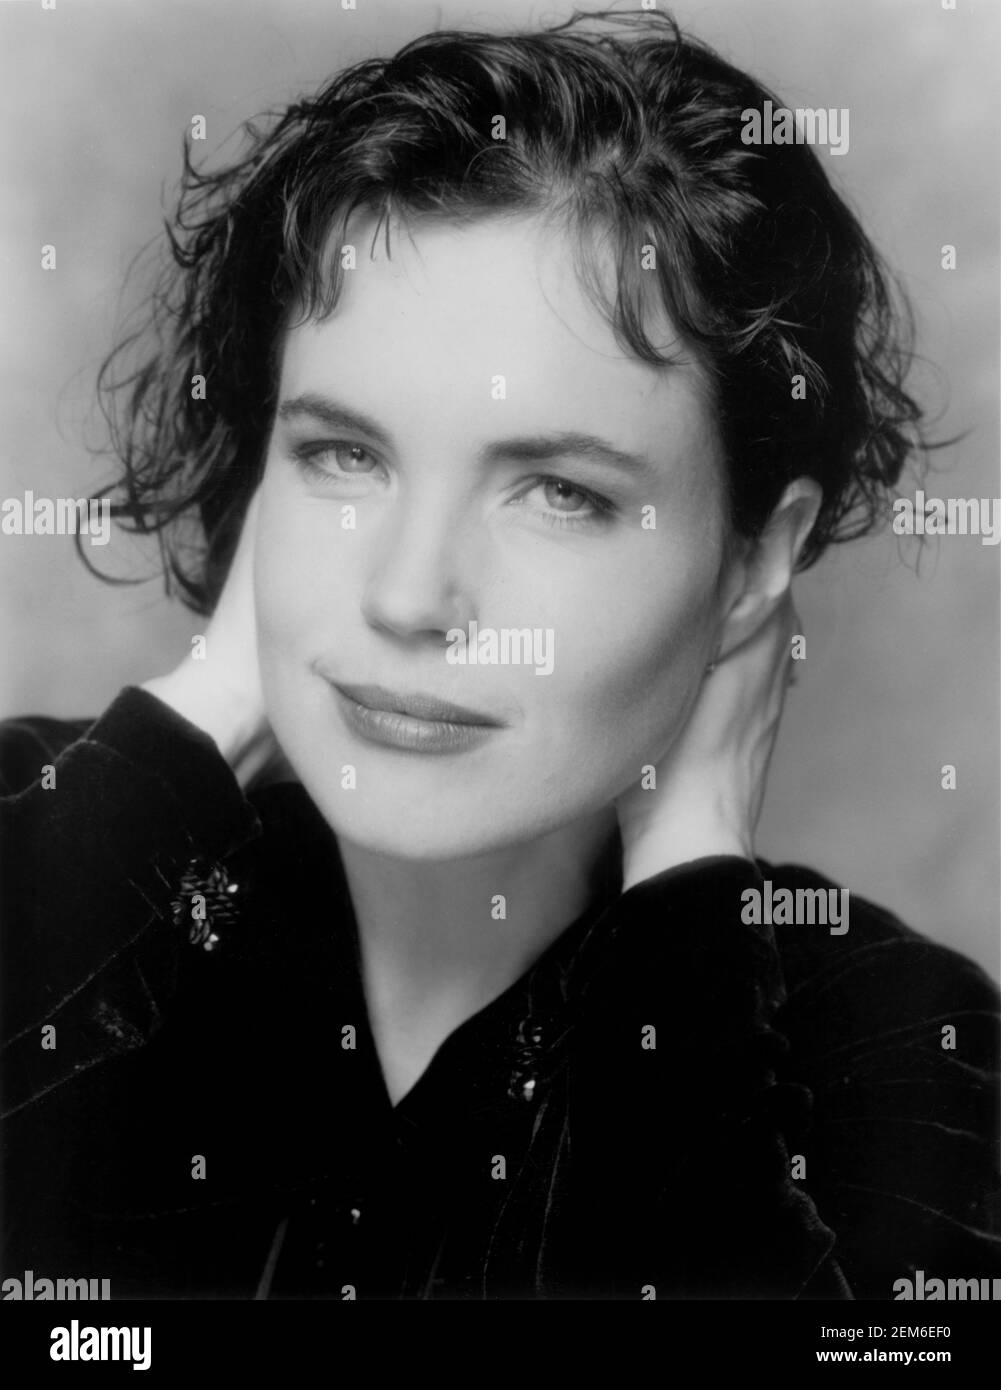 Elizabeth McGovern, Head and Shoulders Publicity Portrait für die TV-Serie, 'If Not for You', Tony Esparza, CBS-TV, 1995 Stockfoto